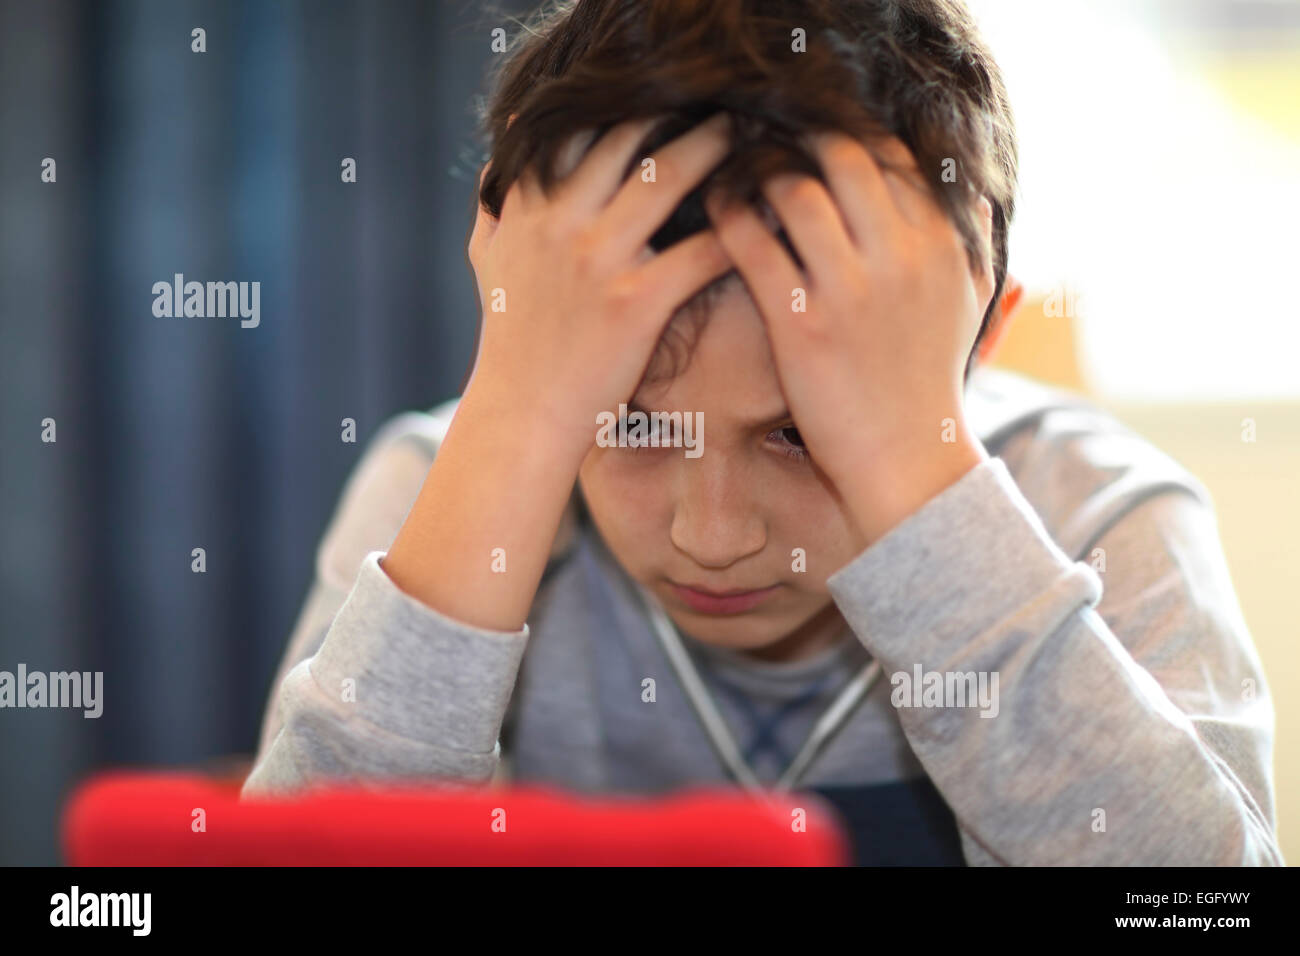 Confused or tired young boy playing with tablet computer Stock Photo